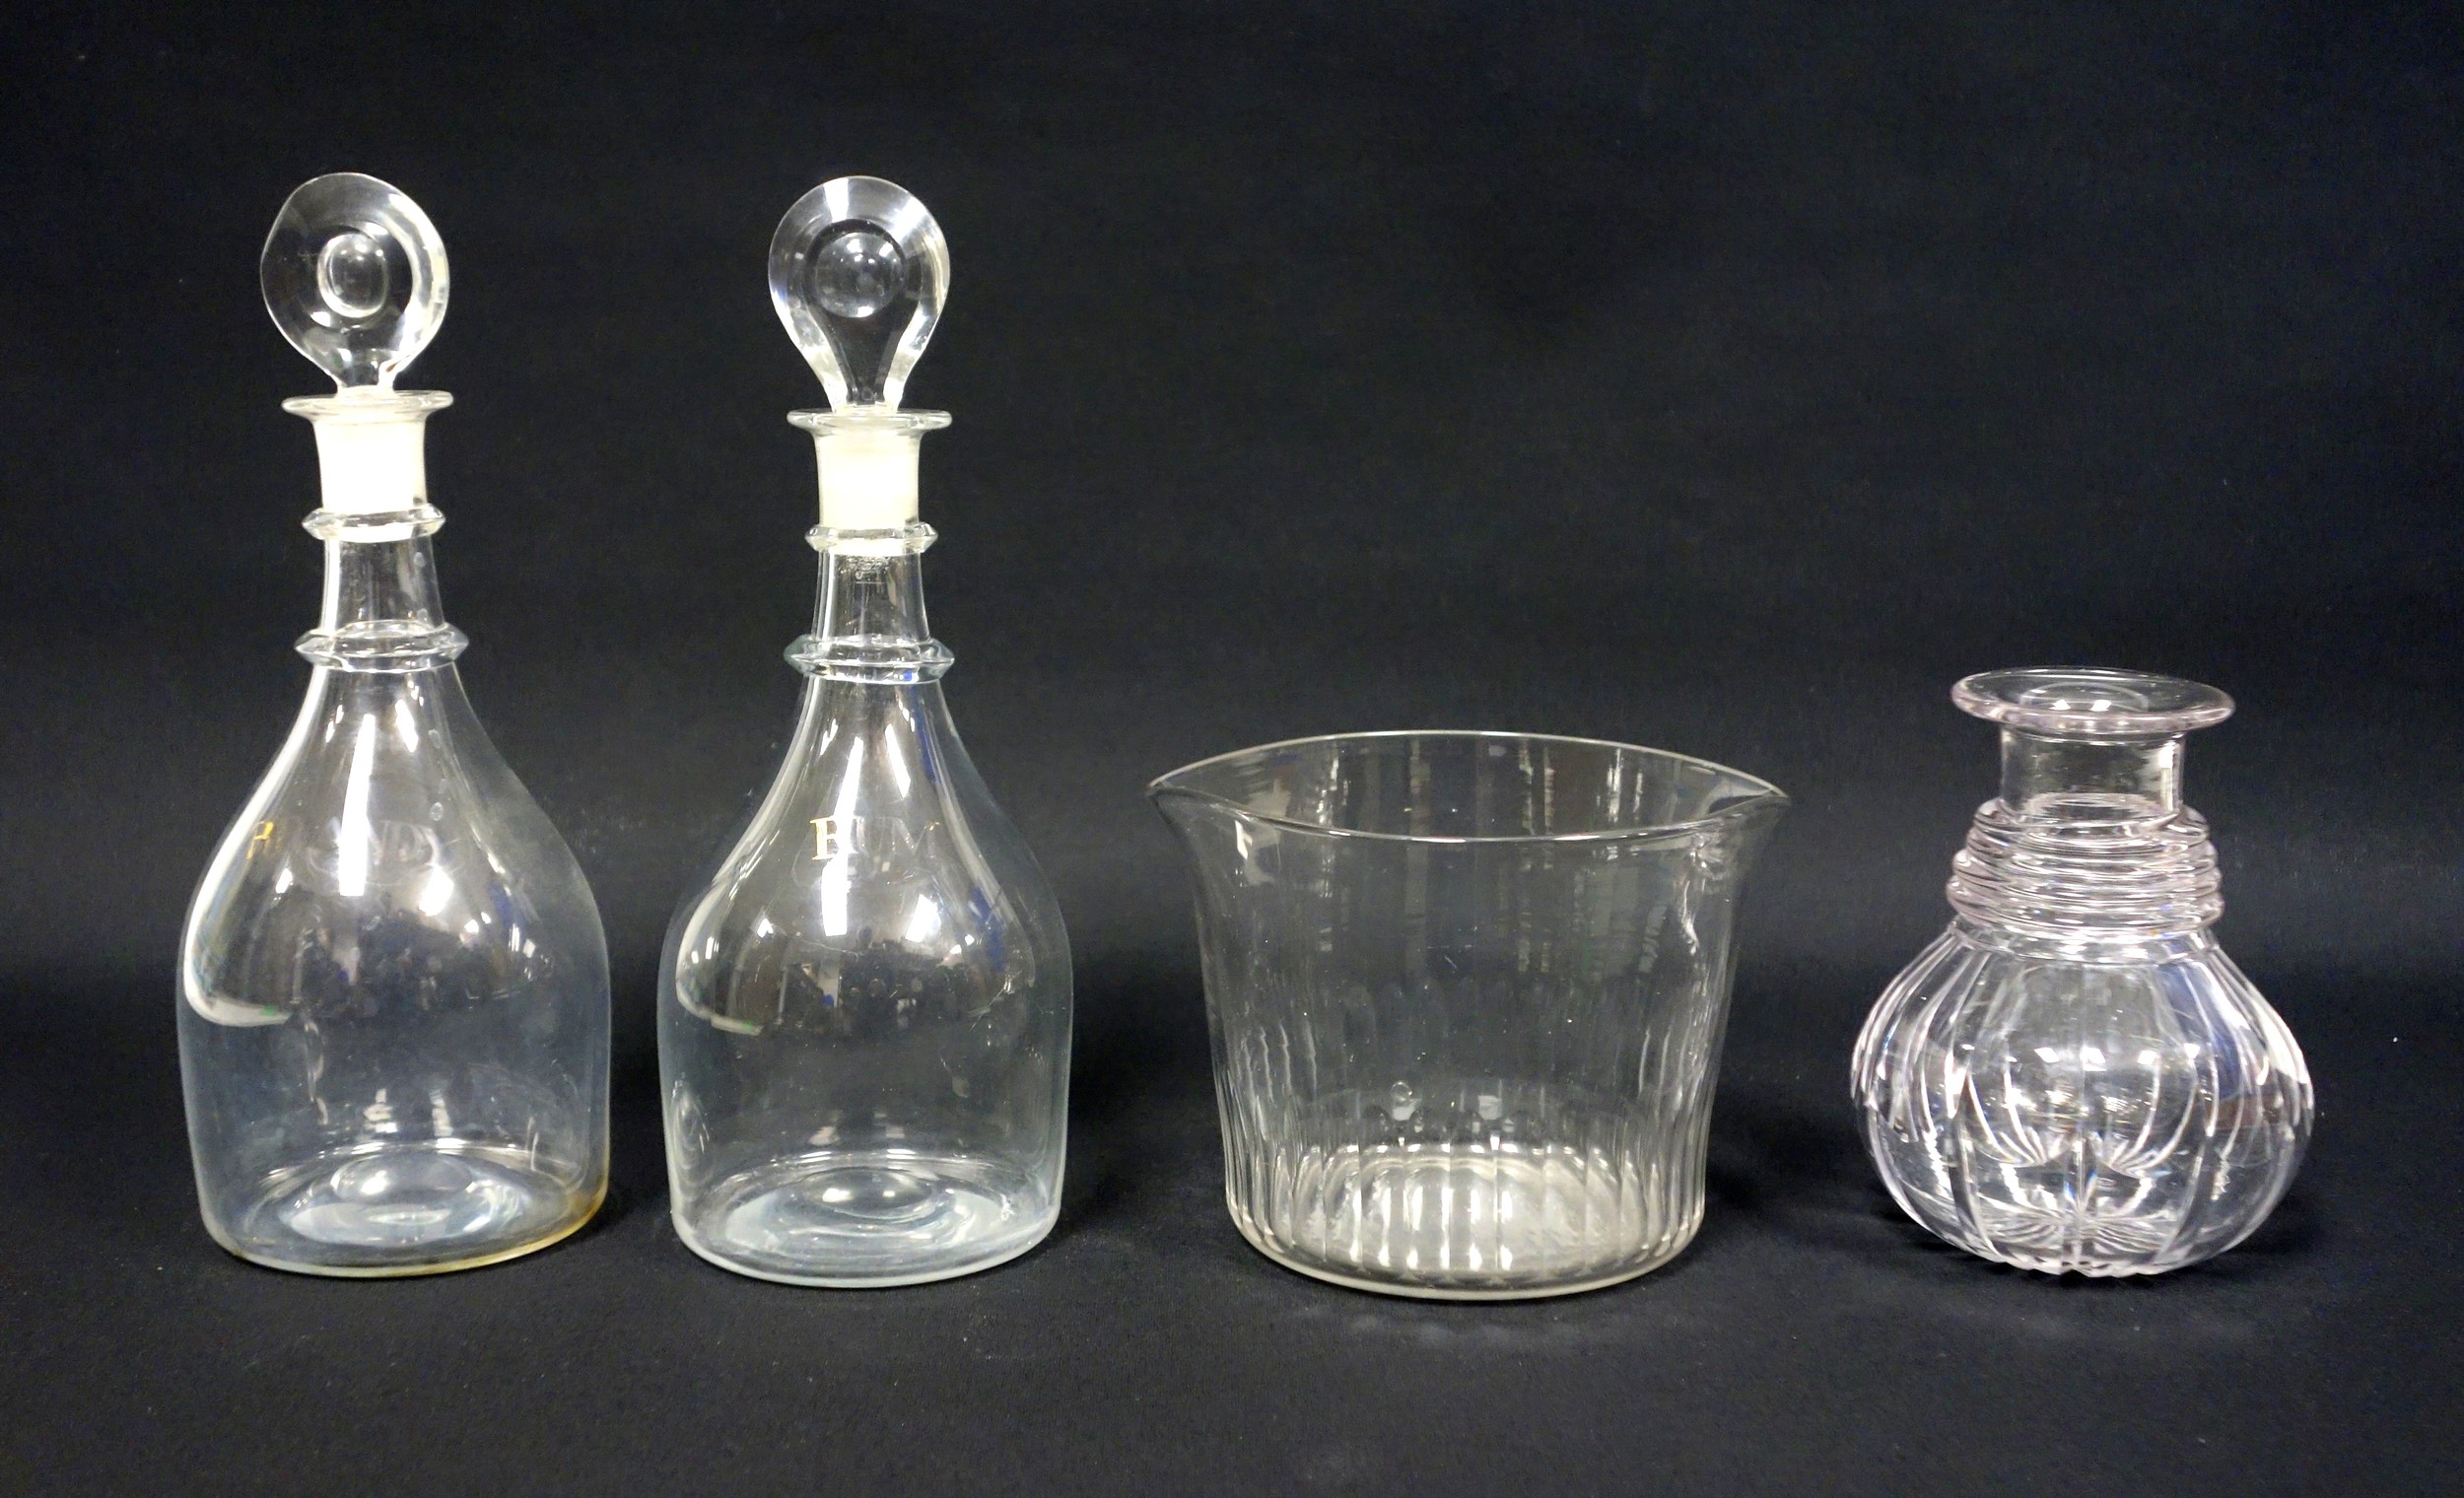 Pair of Georgian glass "Prussian" decanters, faintly lettered "Brandy" and "Rum", with associated